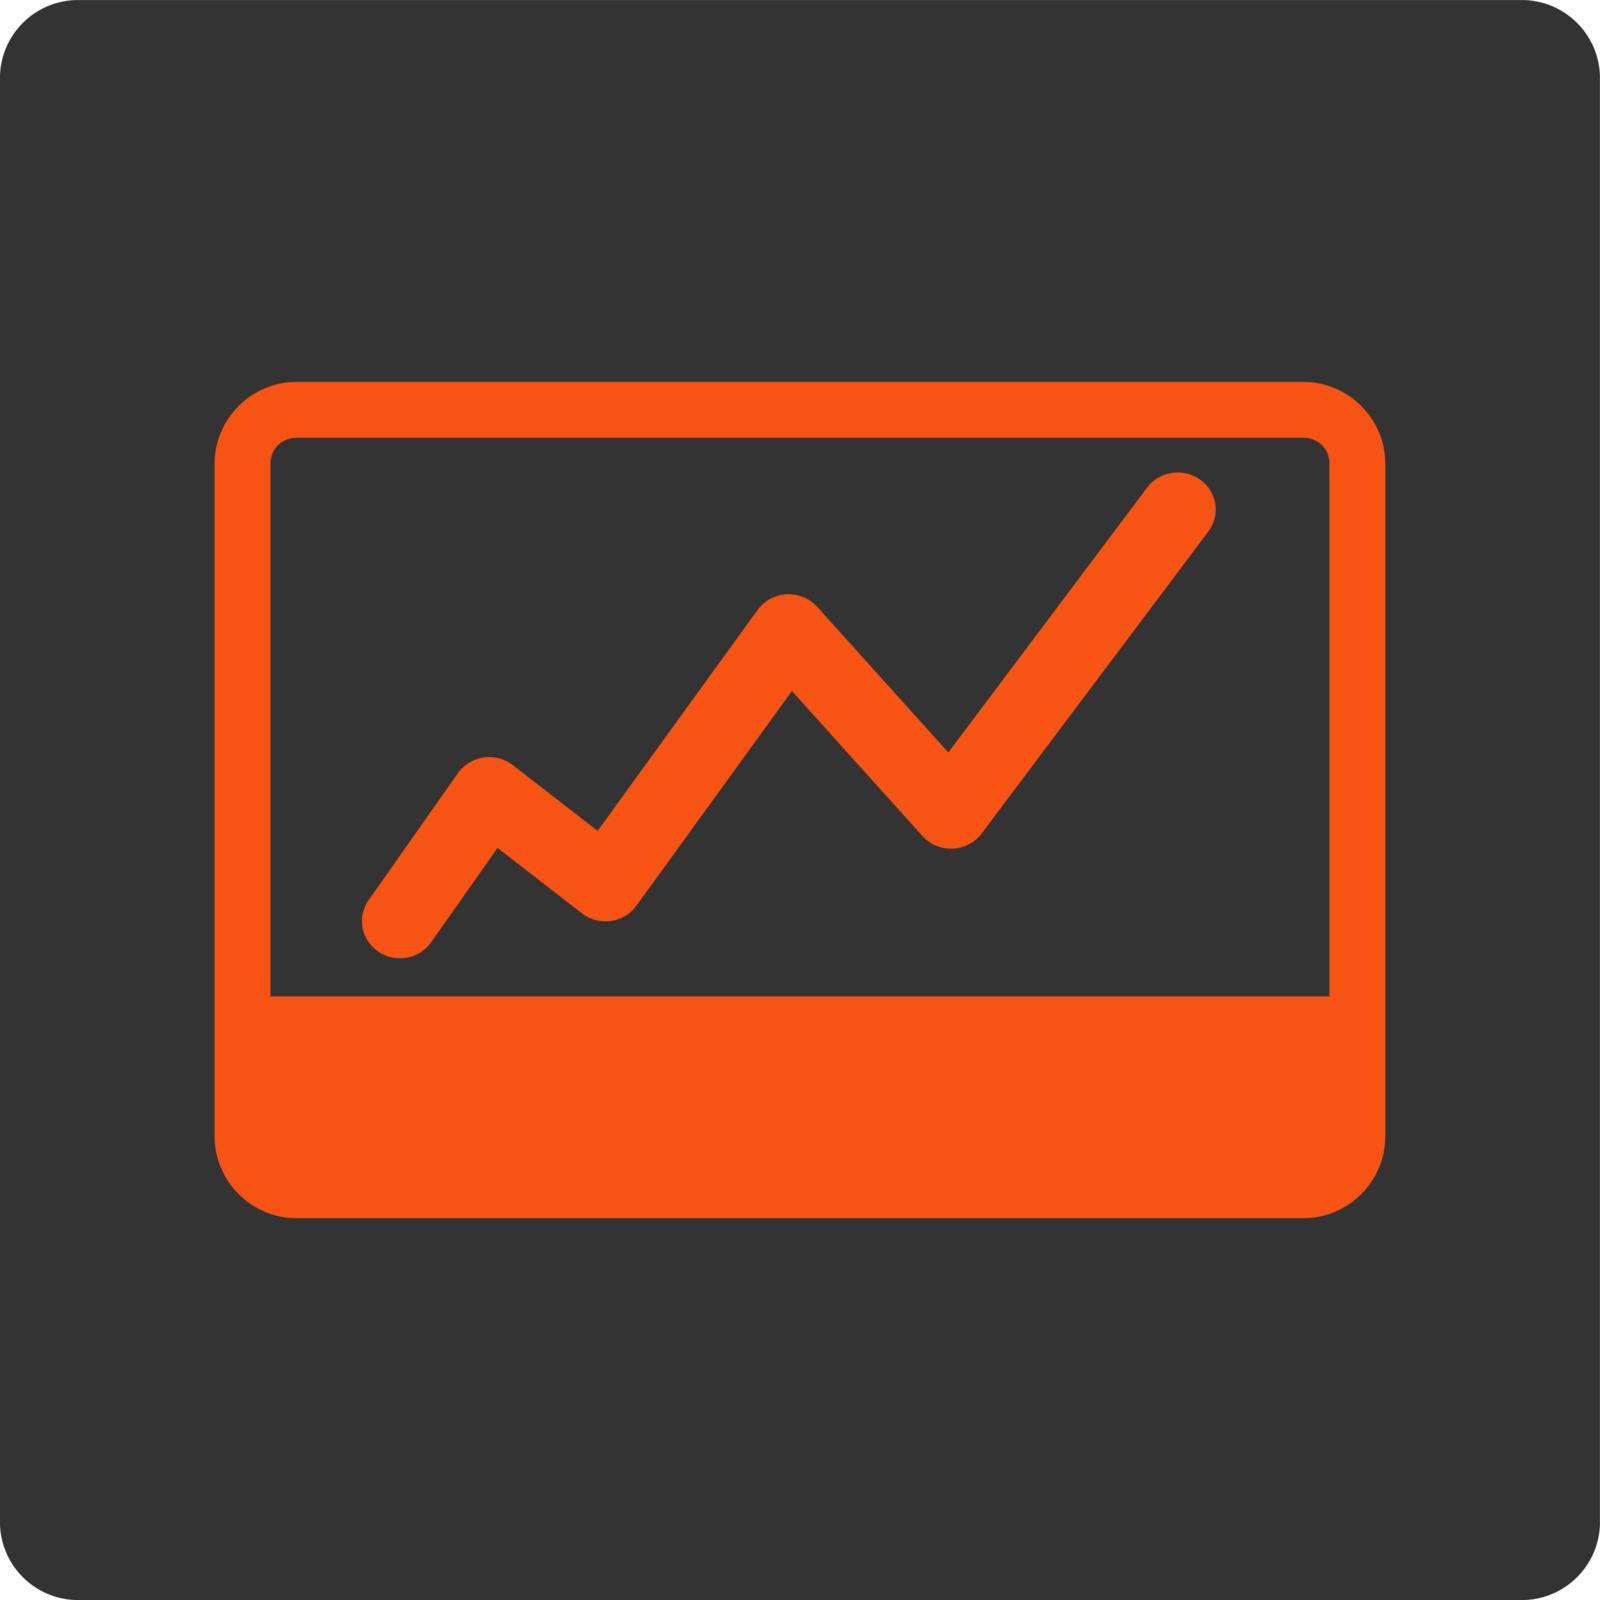 Stock Market icon. This flat rounded square button uses orange and gray colors and isolated on a white background.